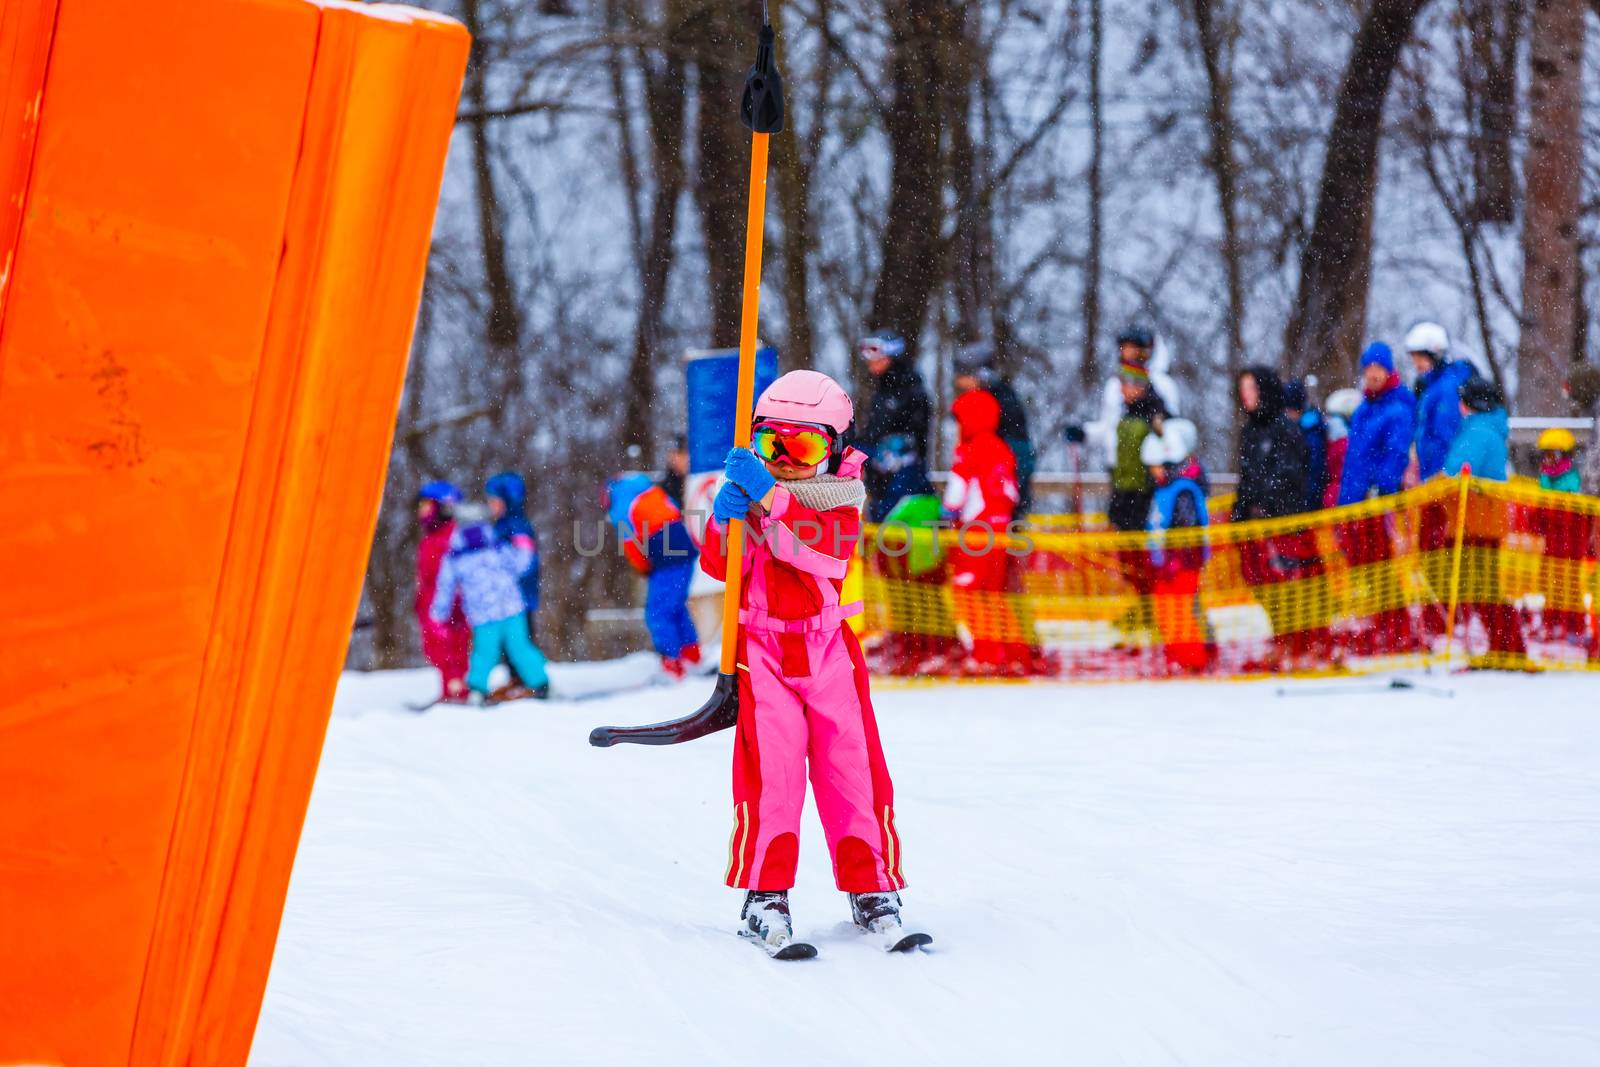 Little girl with ski suit in the ski lift